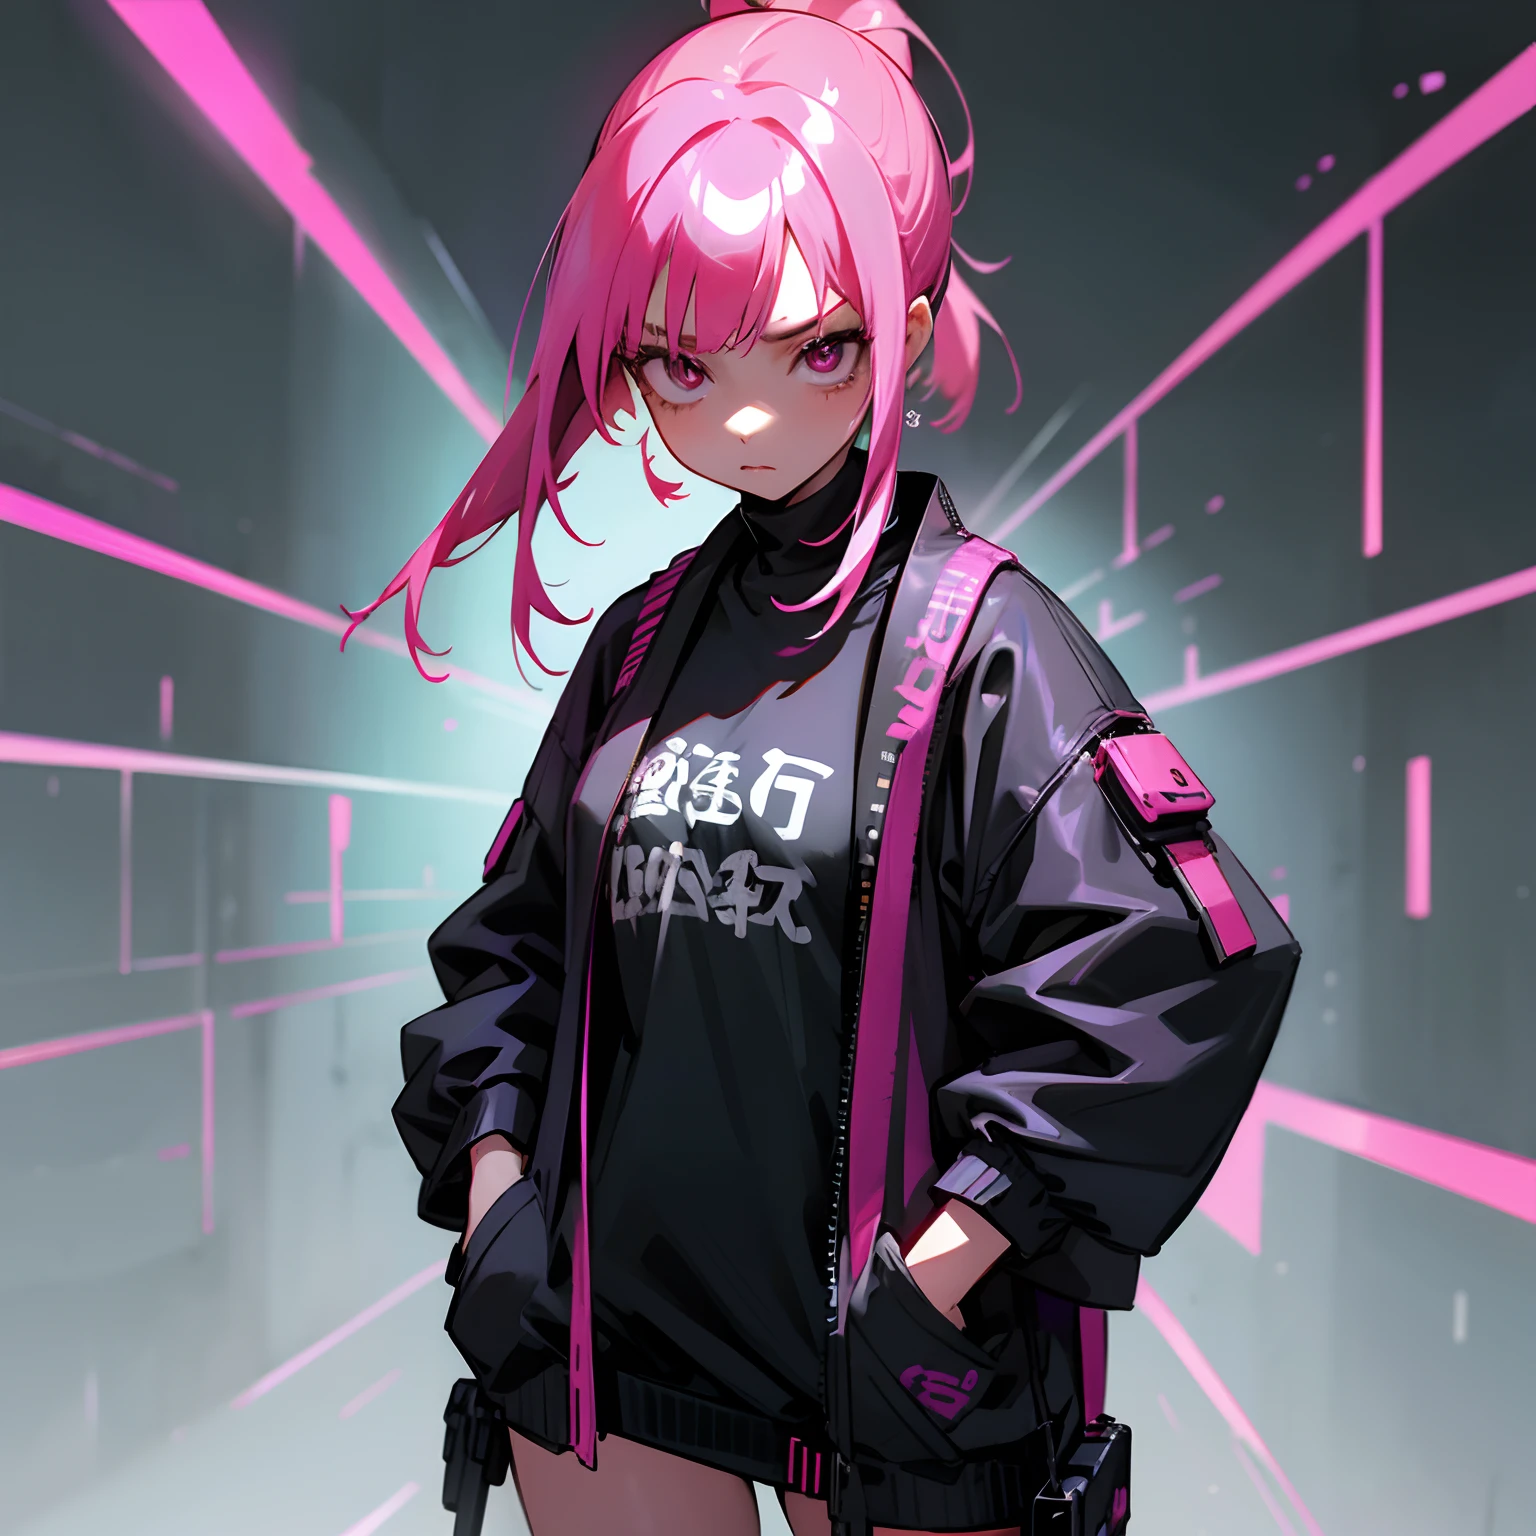 cyberpunk, neon lights,pink  hair,cyberpunk clothing,fully body, Japanese Hair Mask,1 girl, street alley, cyberpunk clothes, hands in a pocket, looking at the viewer, passionate expression, grown-up,30years